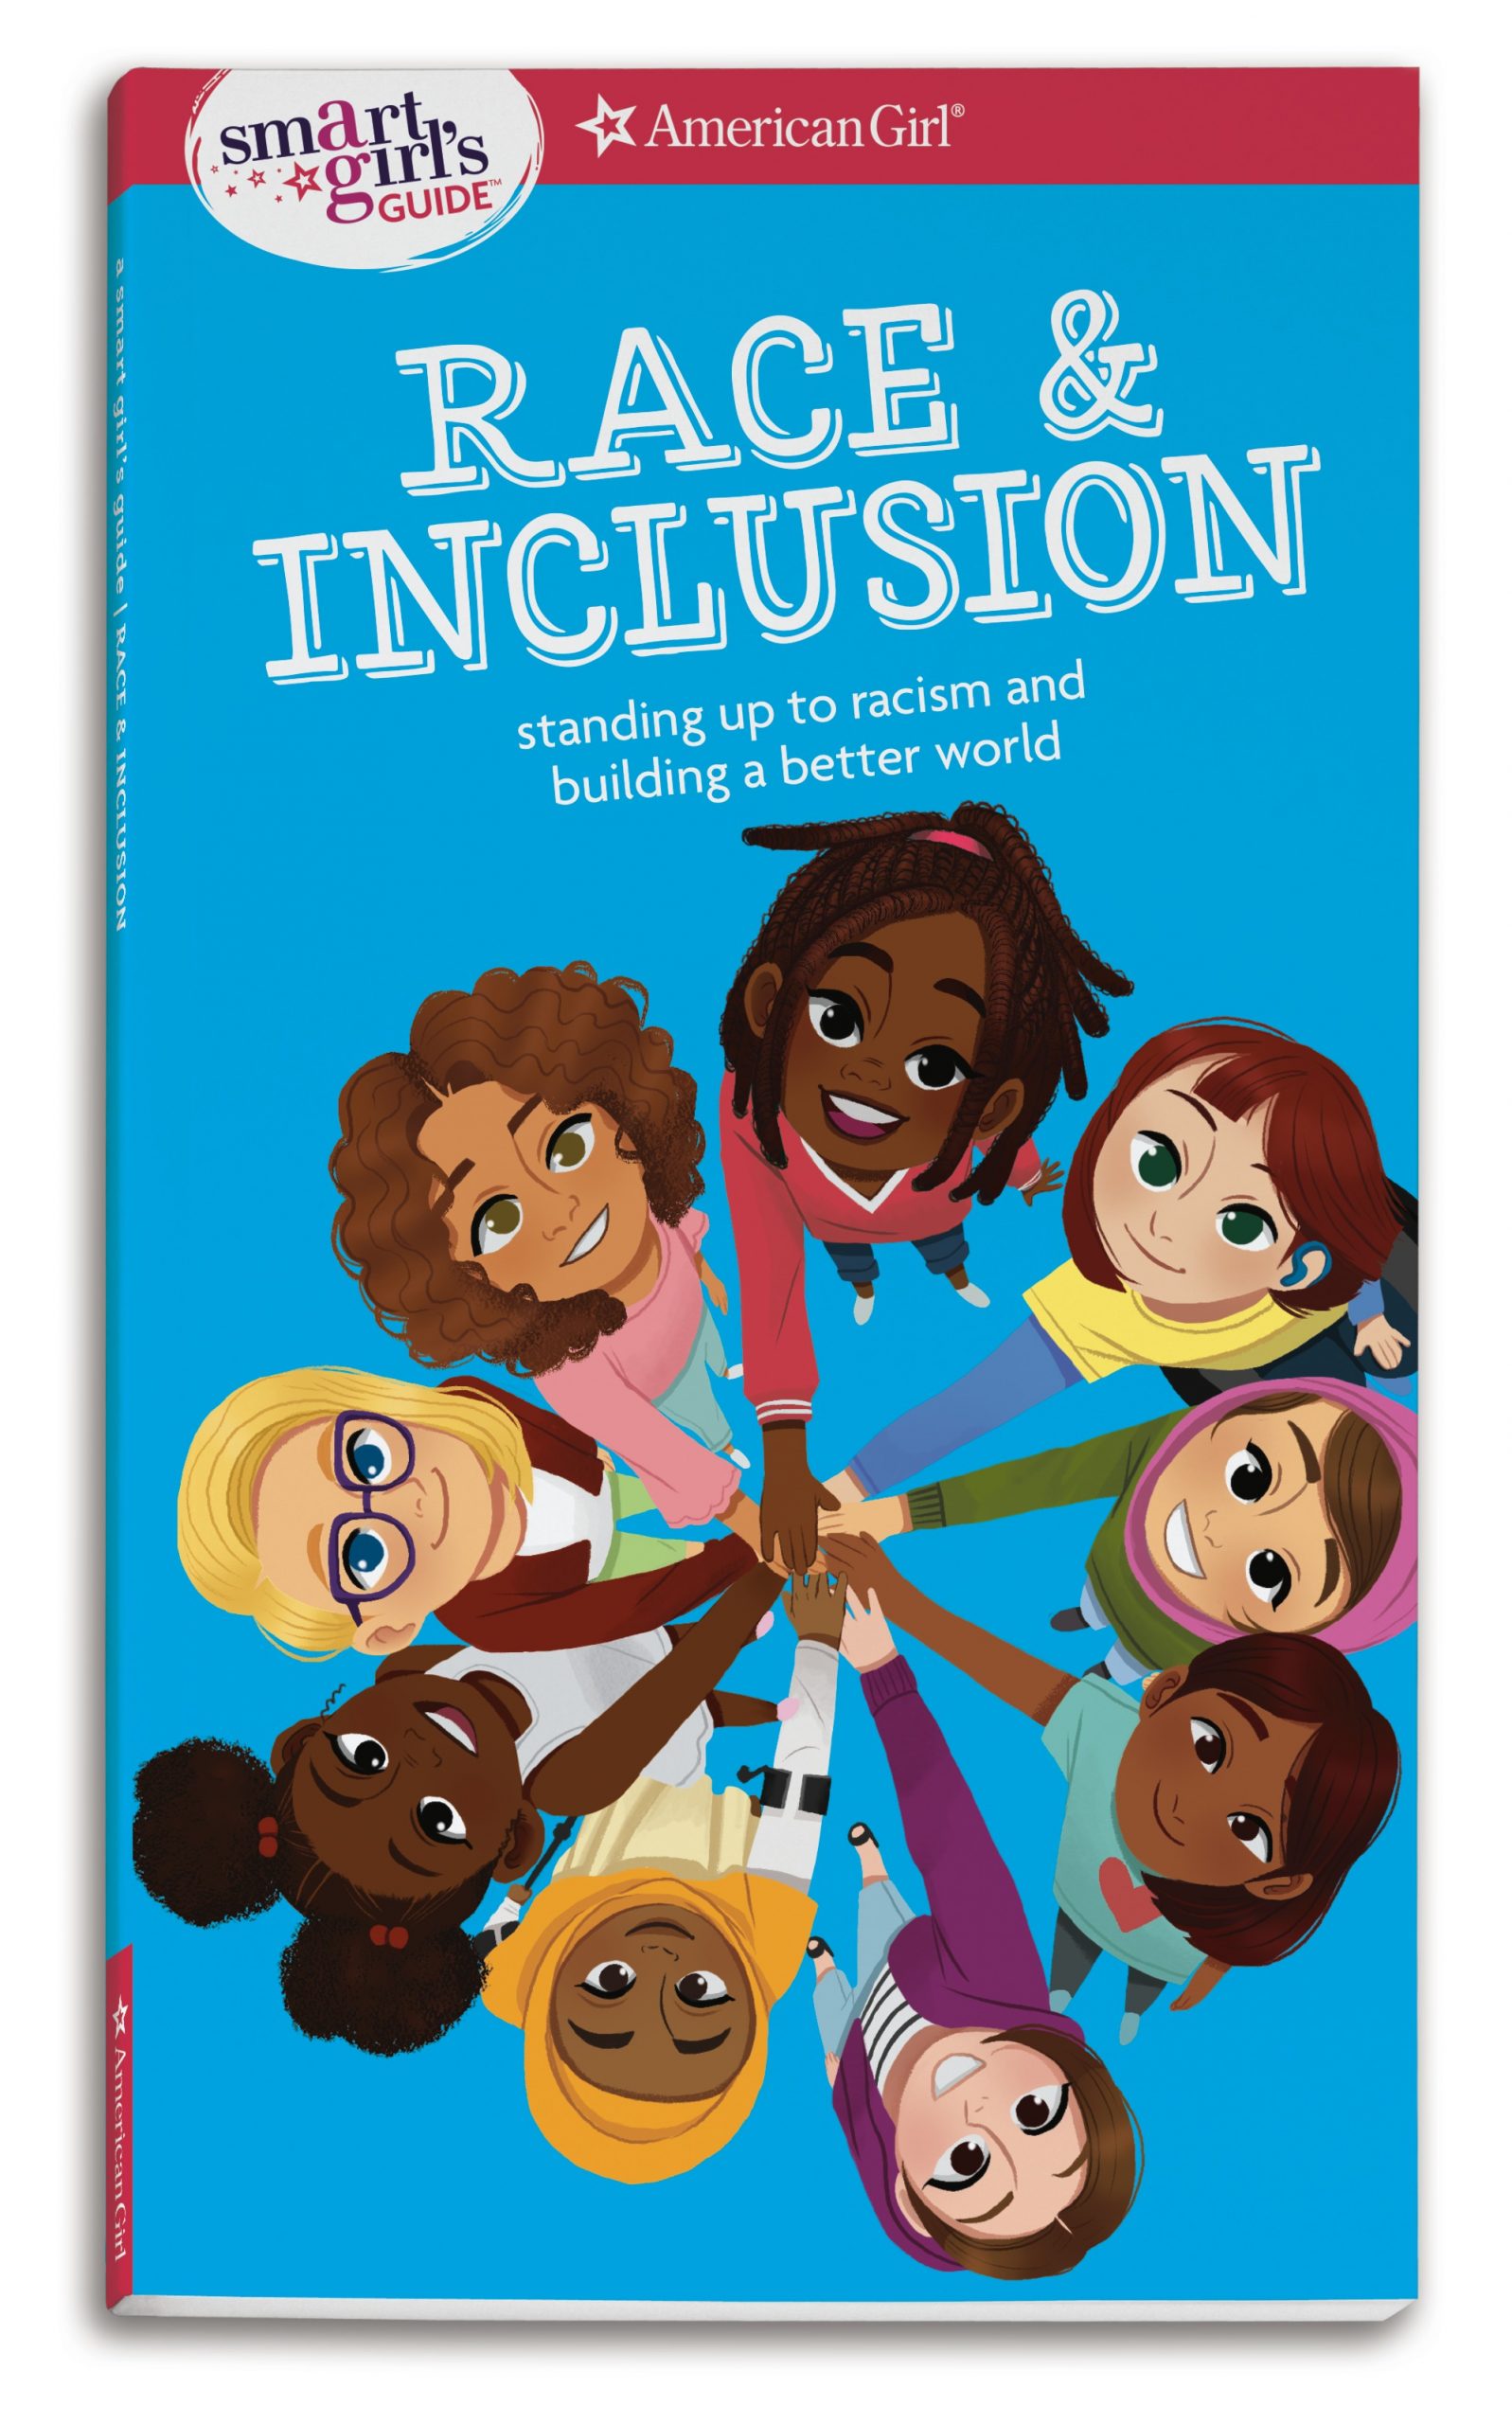 A Smart Girl’s Guide: Race & Inclusion